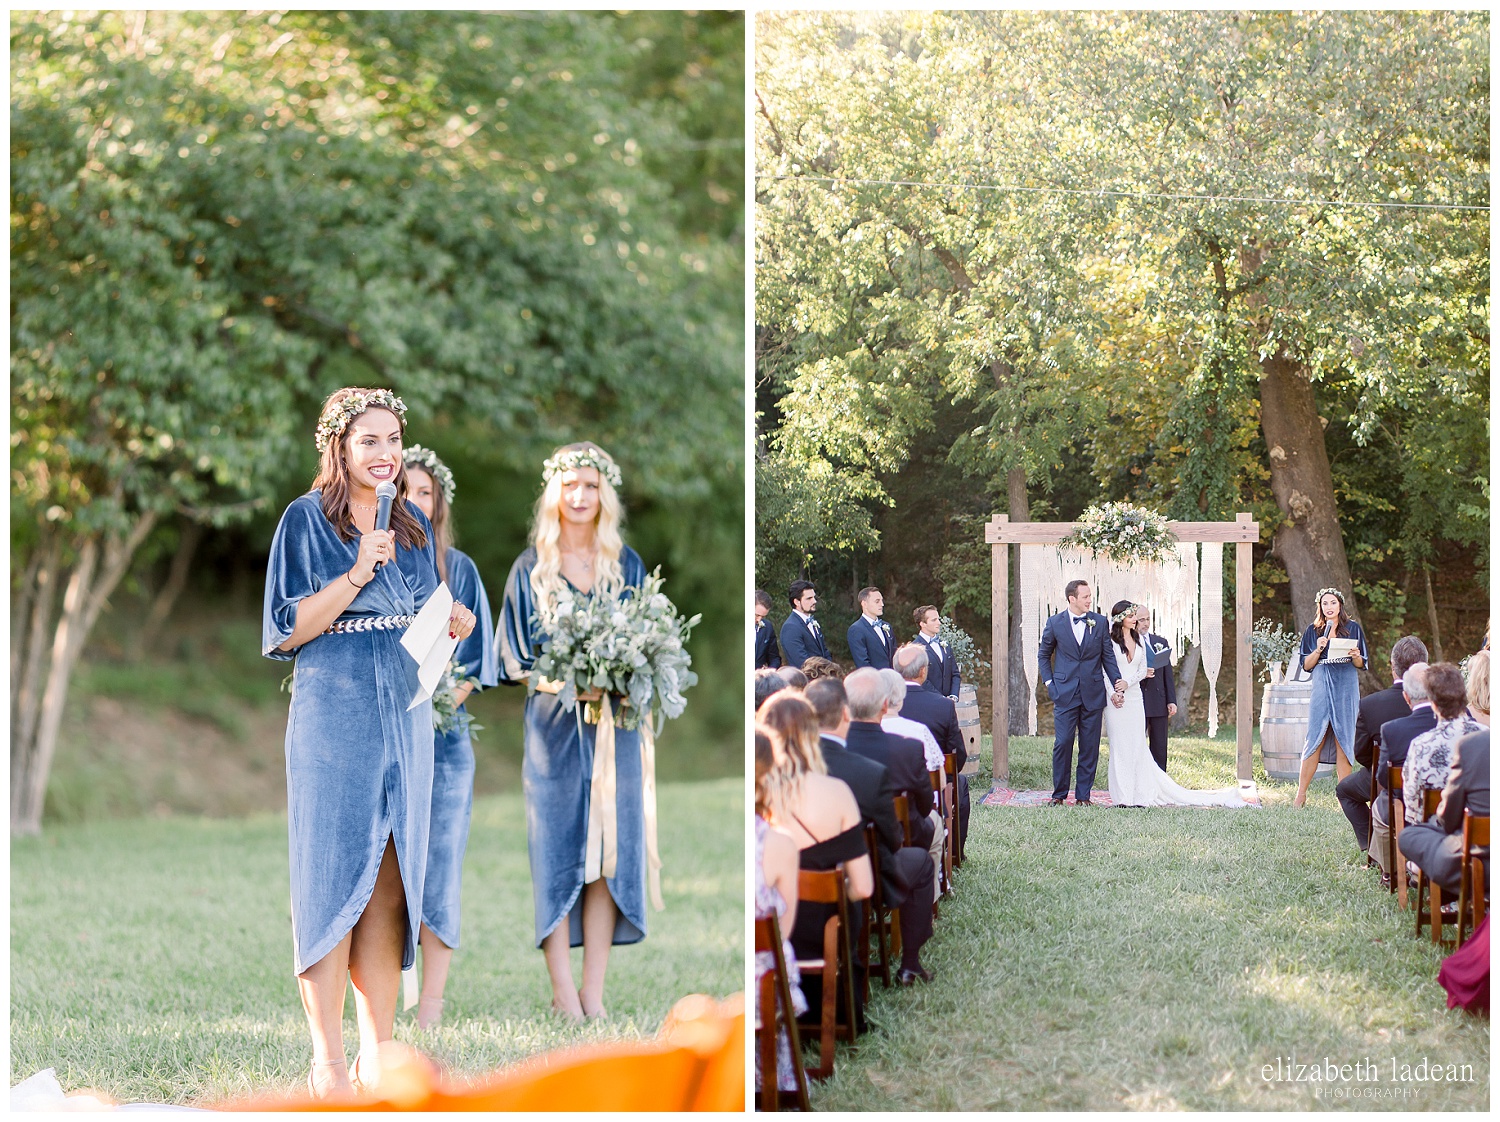 Willow-Creek-Blush-and-Blues-Outdoor-Wedding-Photography-S+Z2018-elizabeth-ladean-photography-photo_0575.jpg